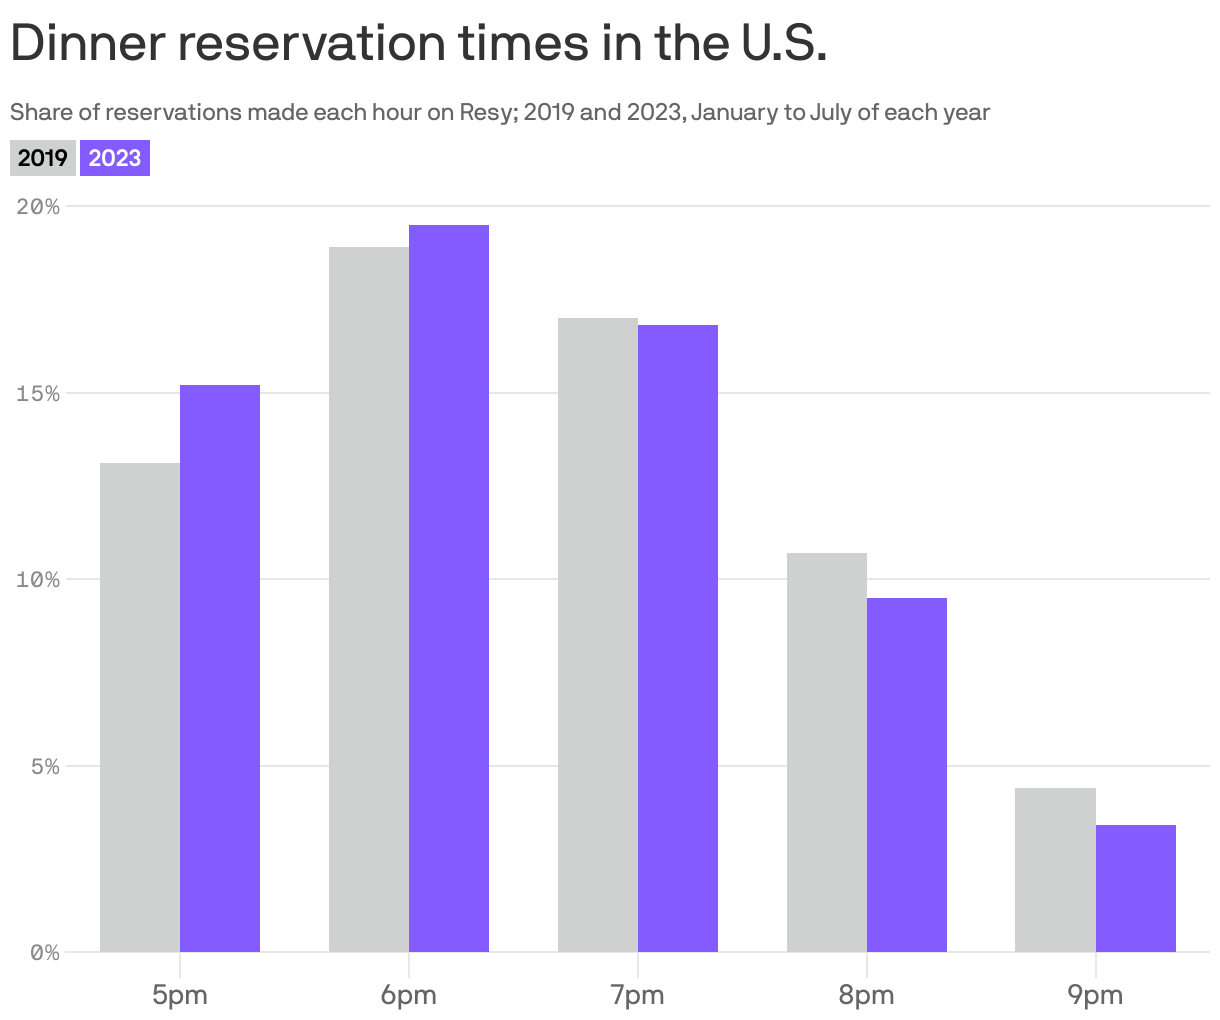 Dinner reservation times in the U.S.